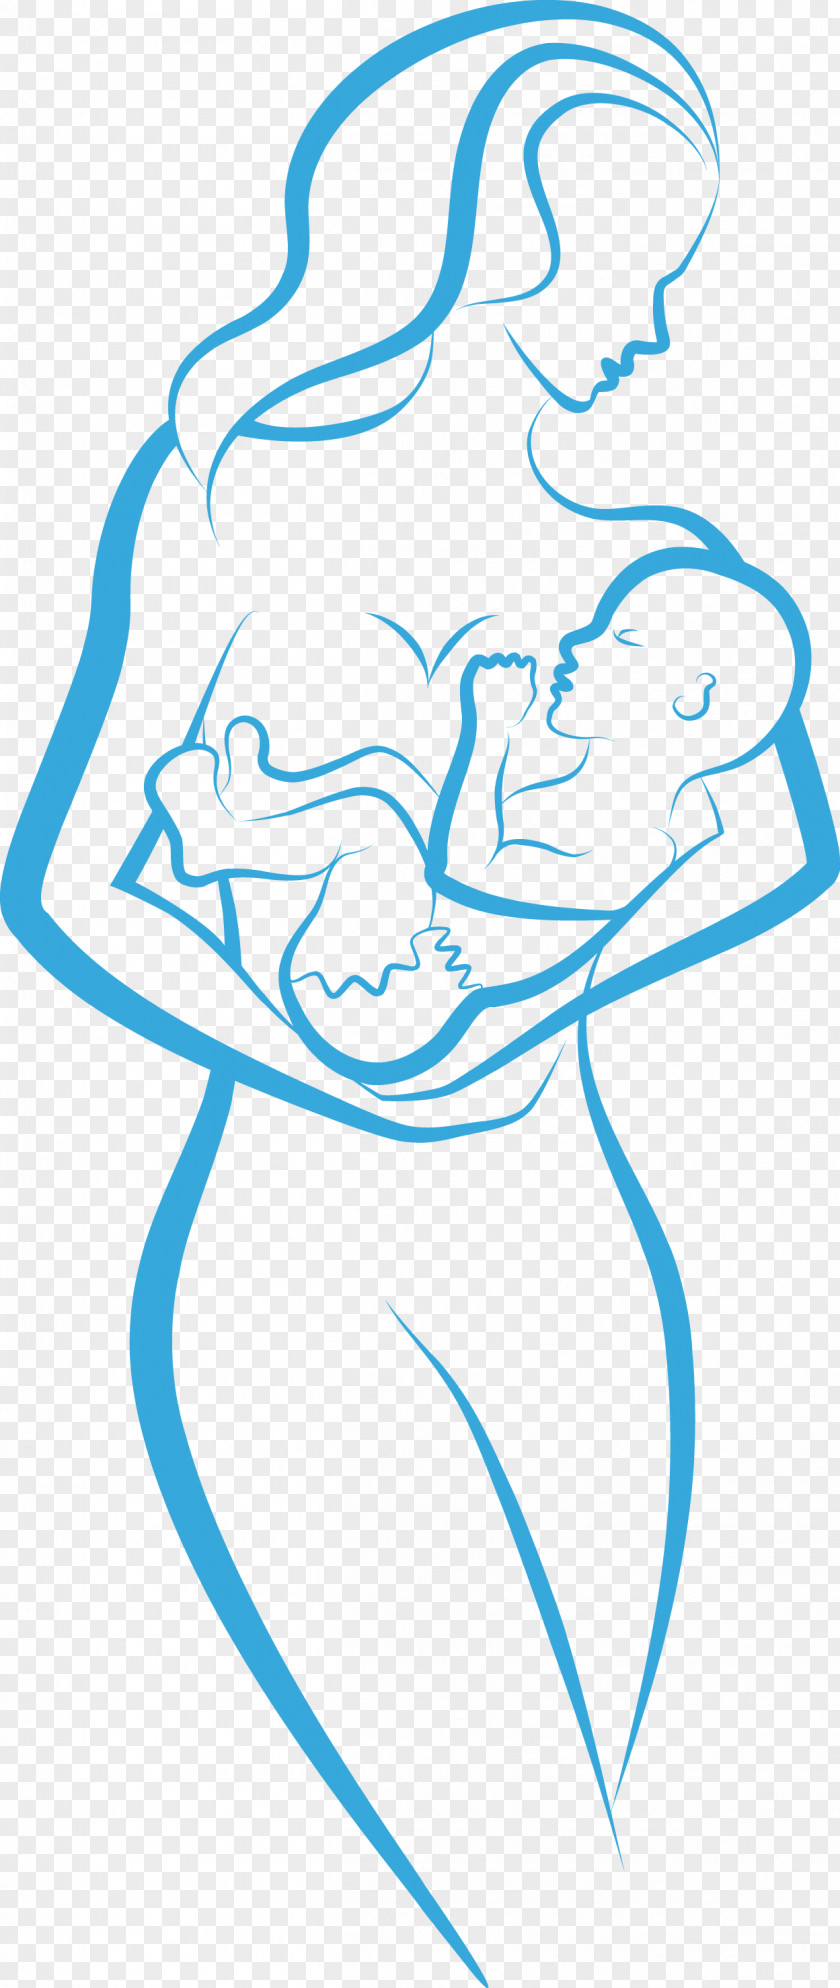 The Woman Holding Child Breastfeeding Mother Illustration PNG